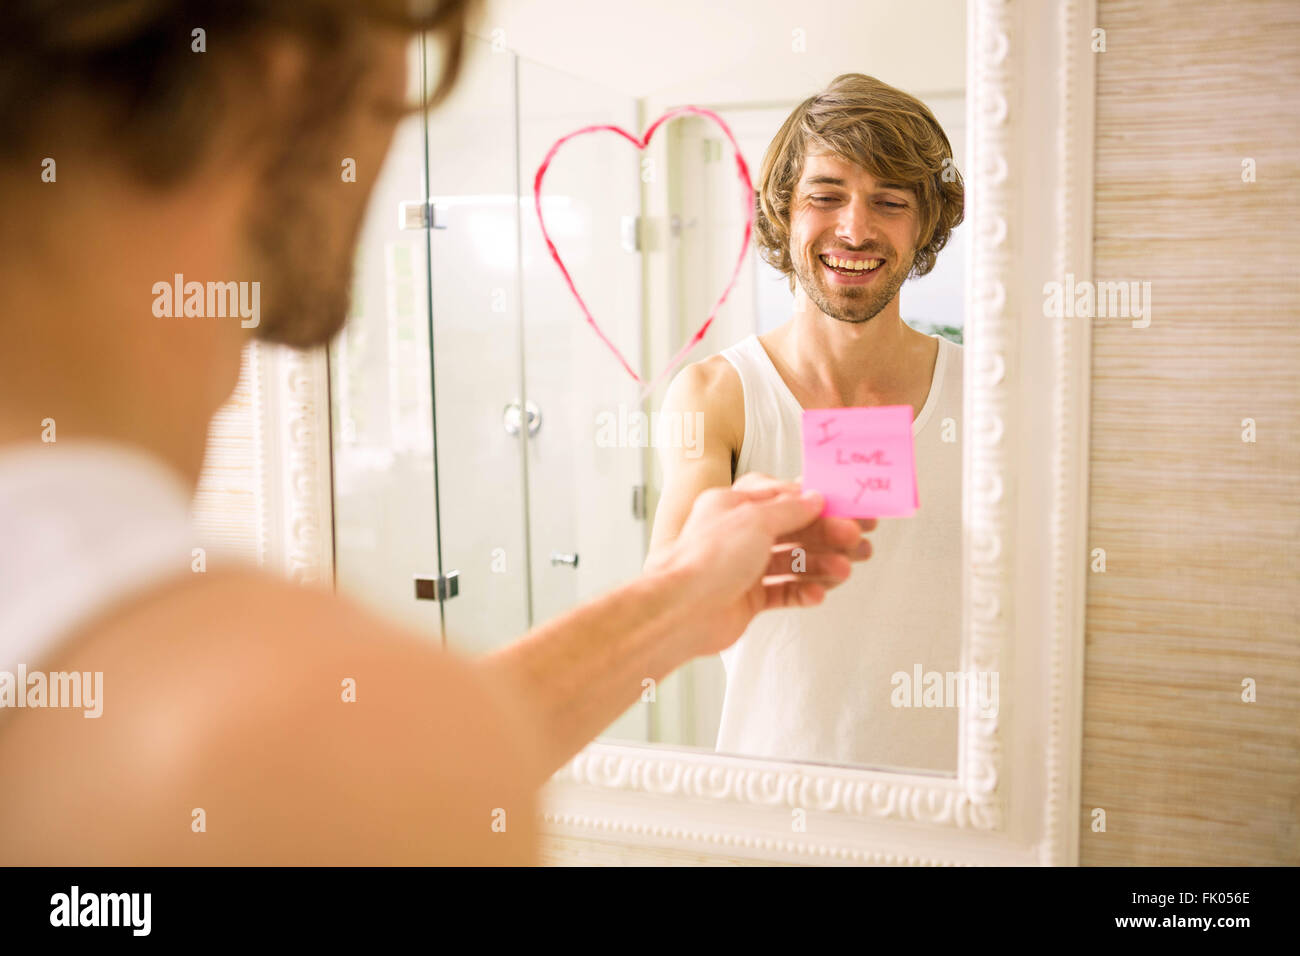 Boyfriend discovering a love message on the mirror Stock Photo